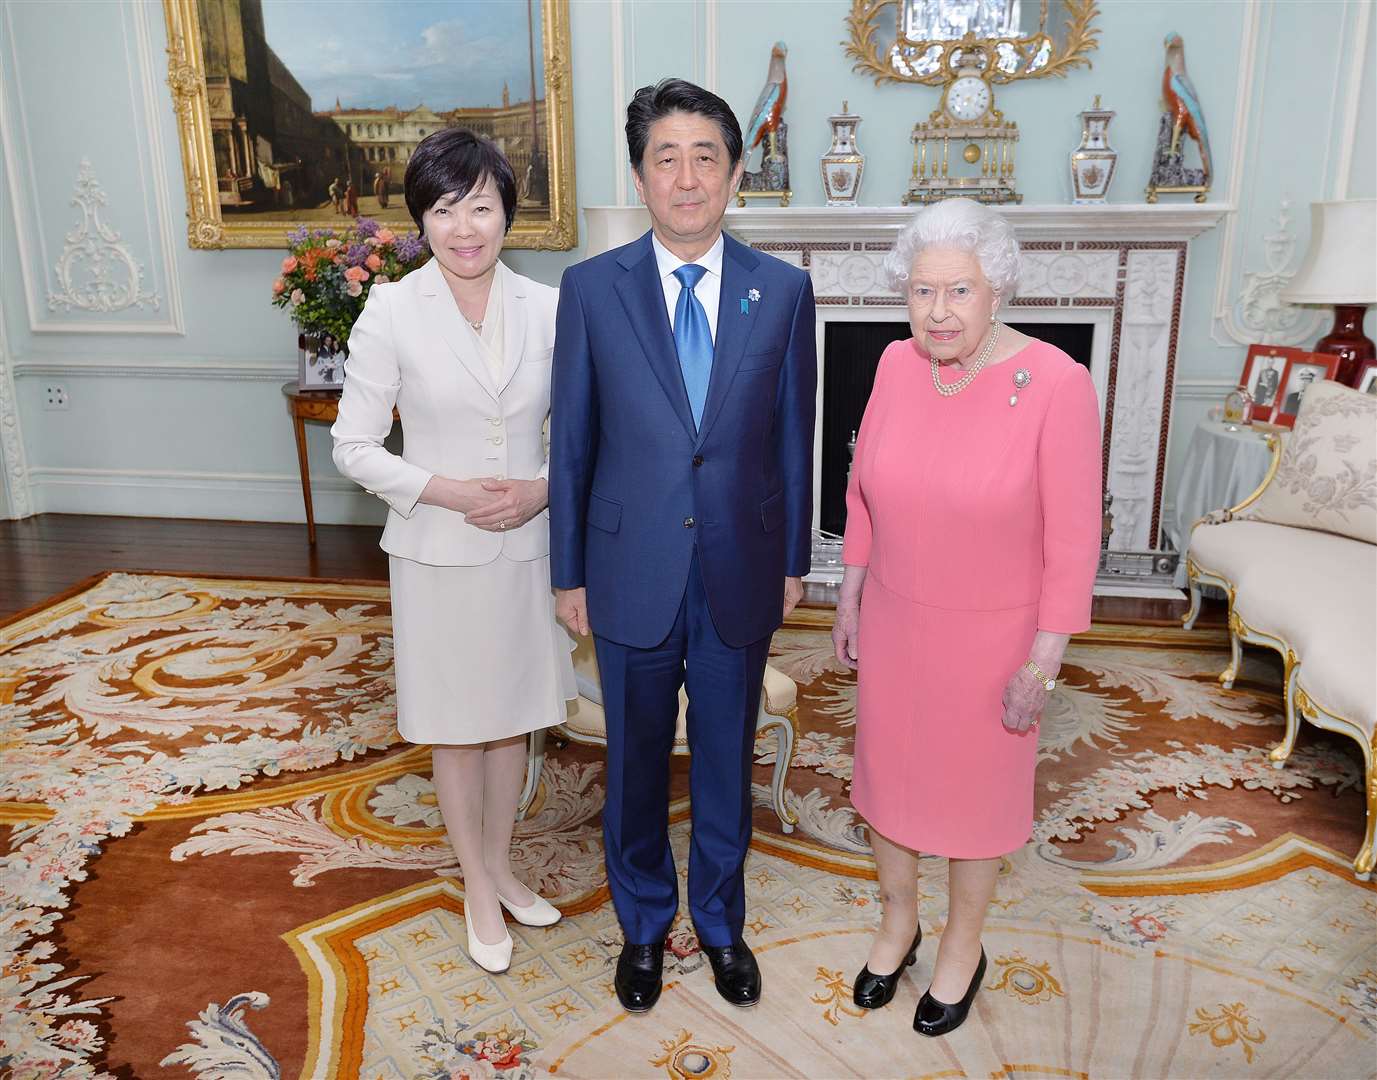 The Queen during her 2016 meeting with the then Prime Minister of Japan Shinzo Abe and his wife Akie Abe (John Stillwell/PA)